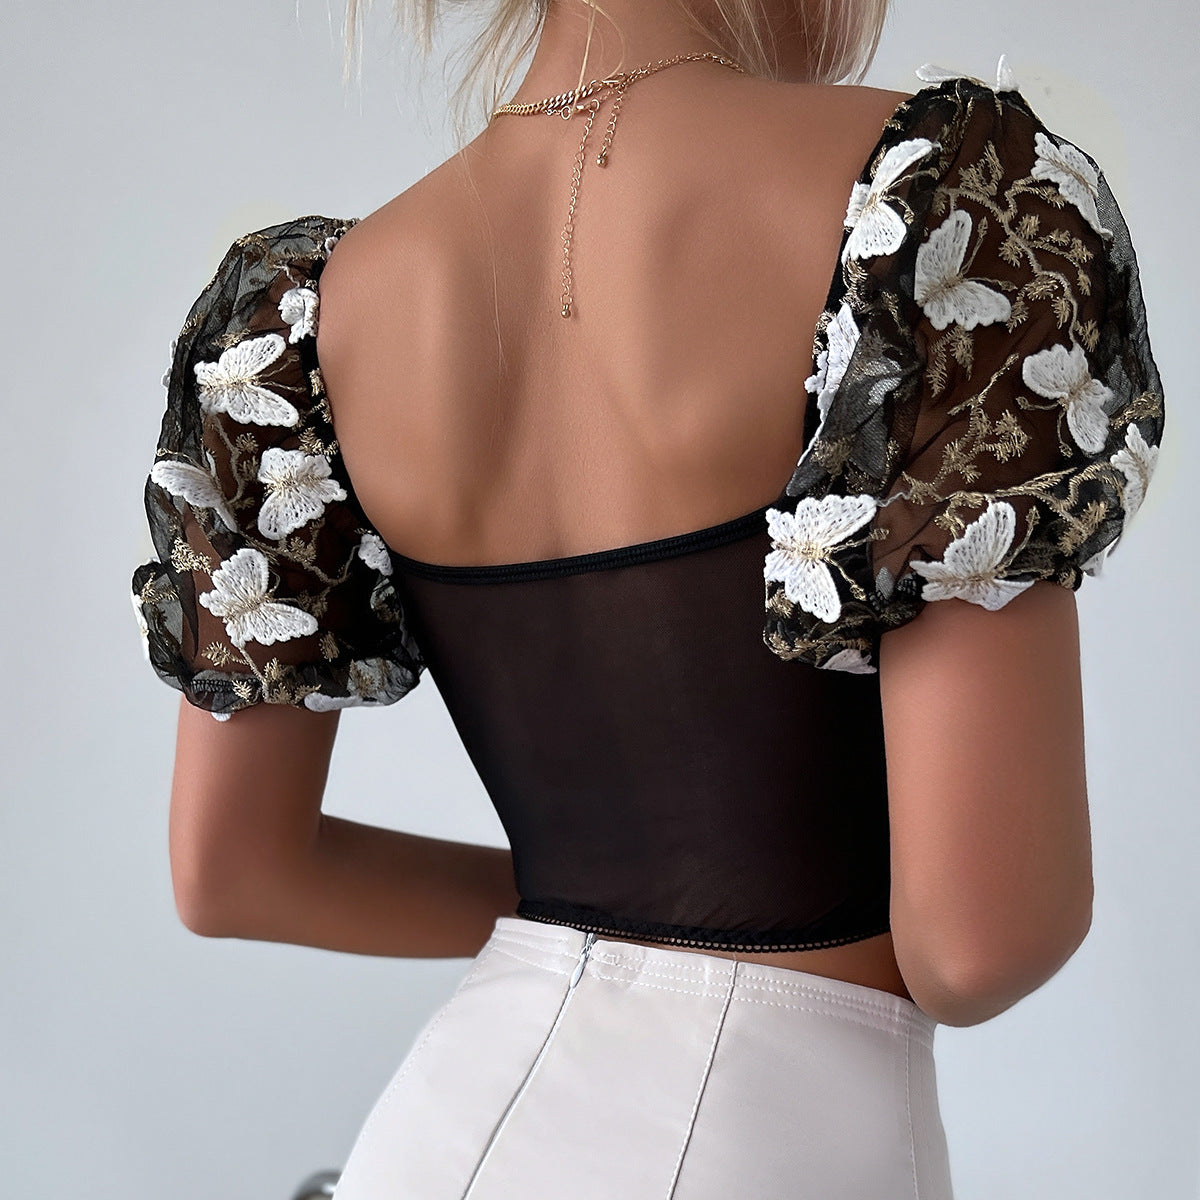 A person is shown from behind wearing a Maramalive™ Ladies New Hot Girl Backless See-through Camisole with puff sleeves featuring white floral embroidery, embodying European and American style, paired with white high-waisted pants.